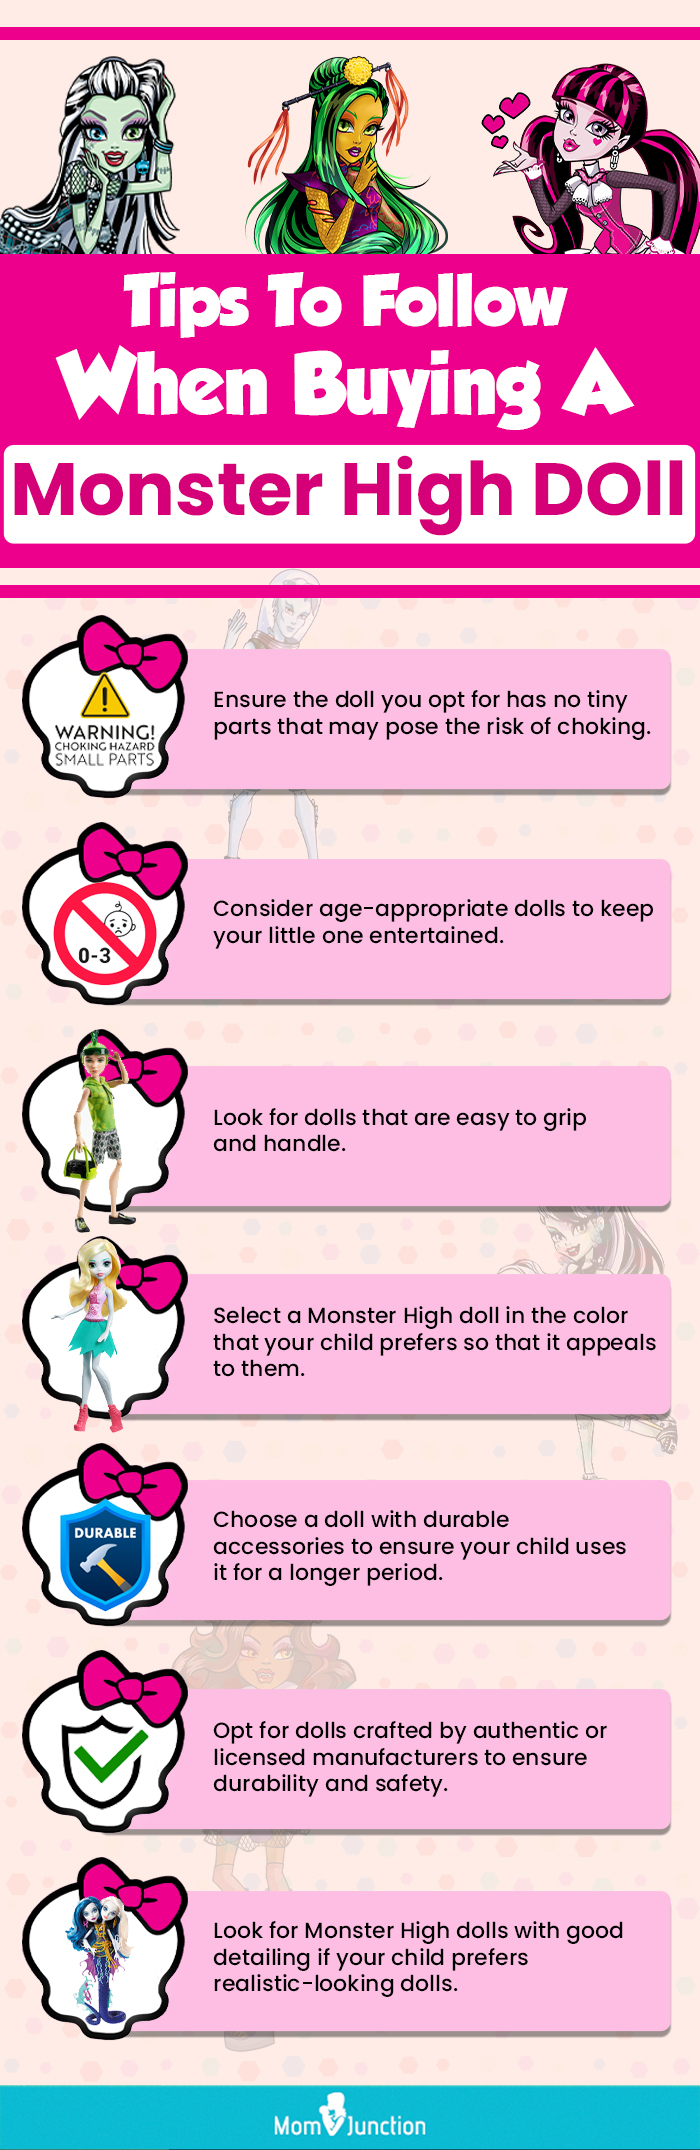 Tips To Follow When Buying A Monster High Doll (Infographic)